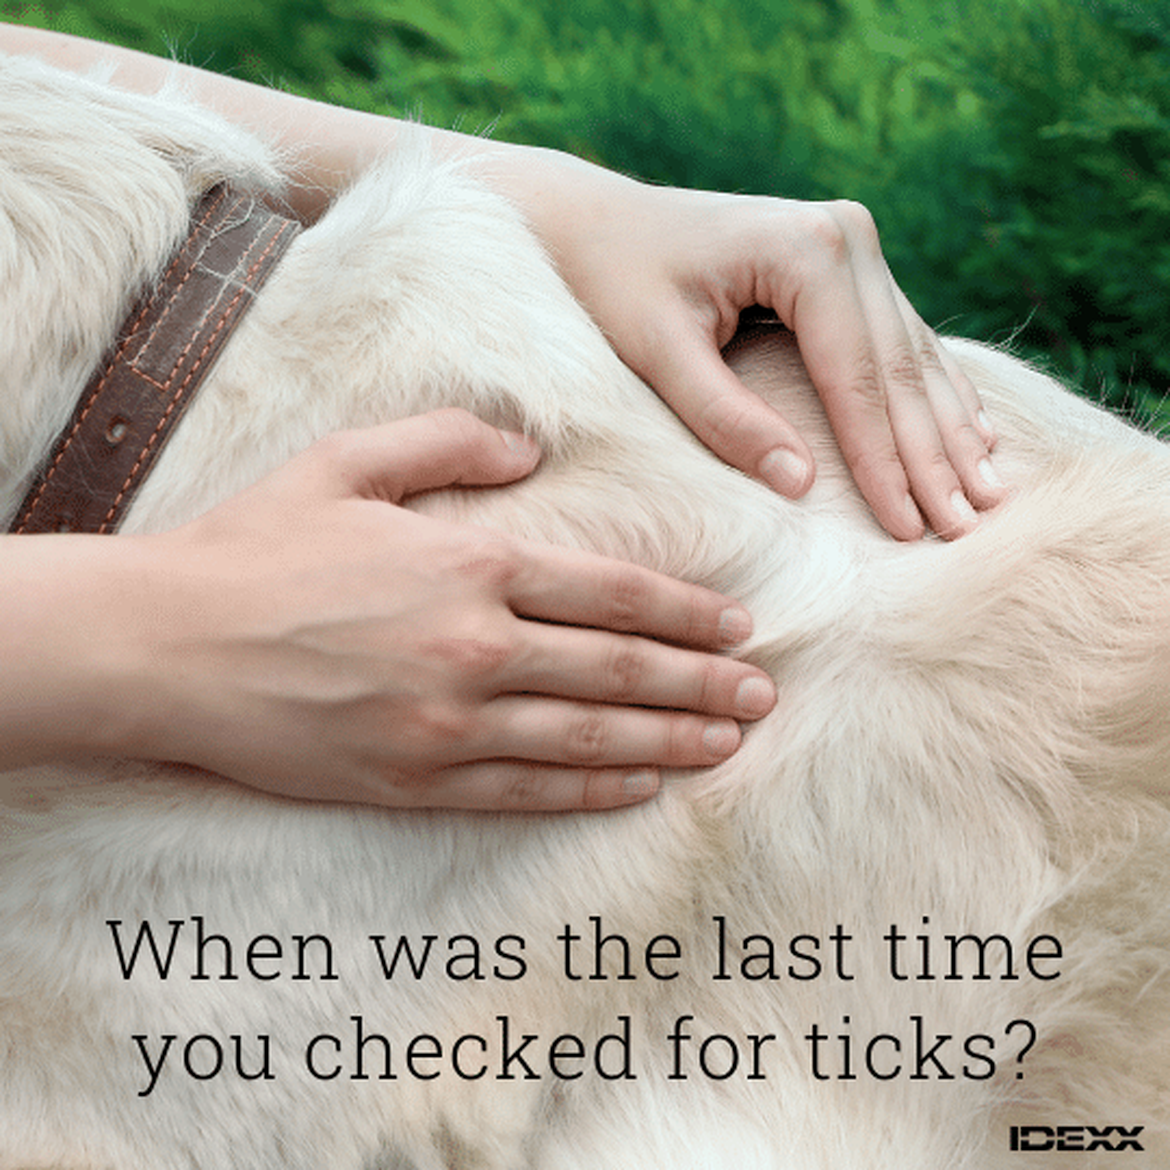 Social media post educating on the importance of checking for ticks regularly.